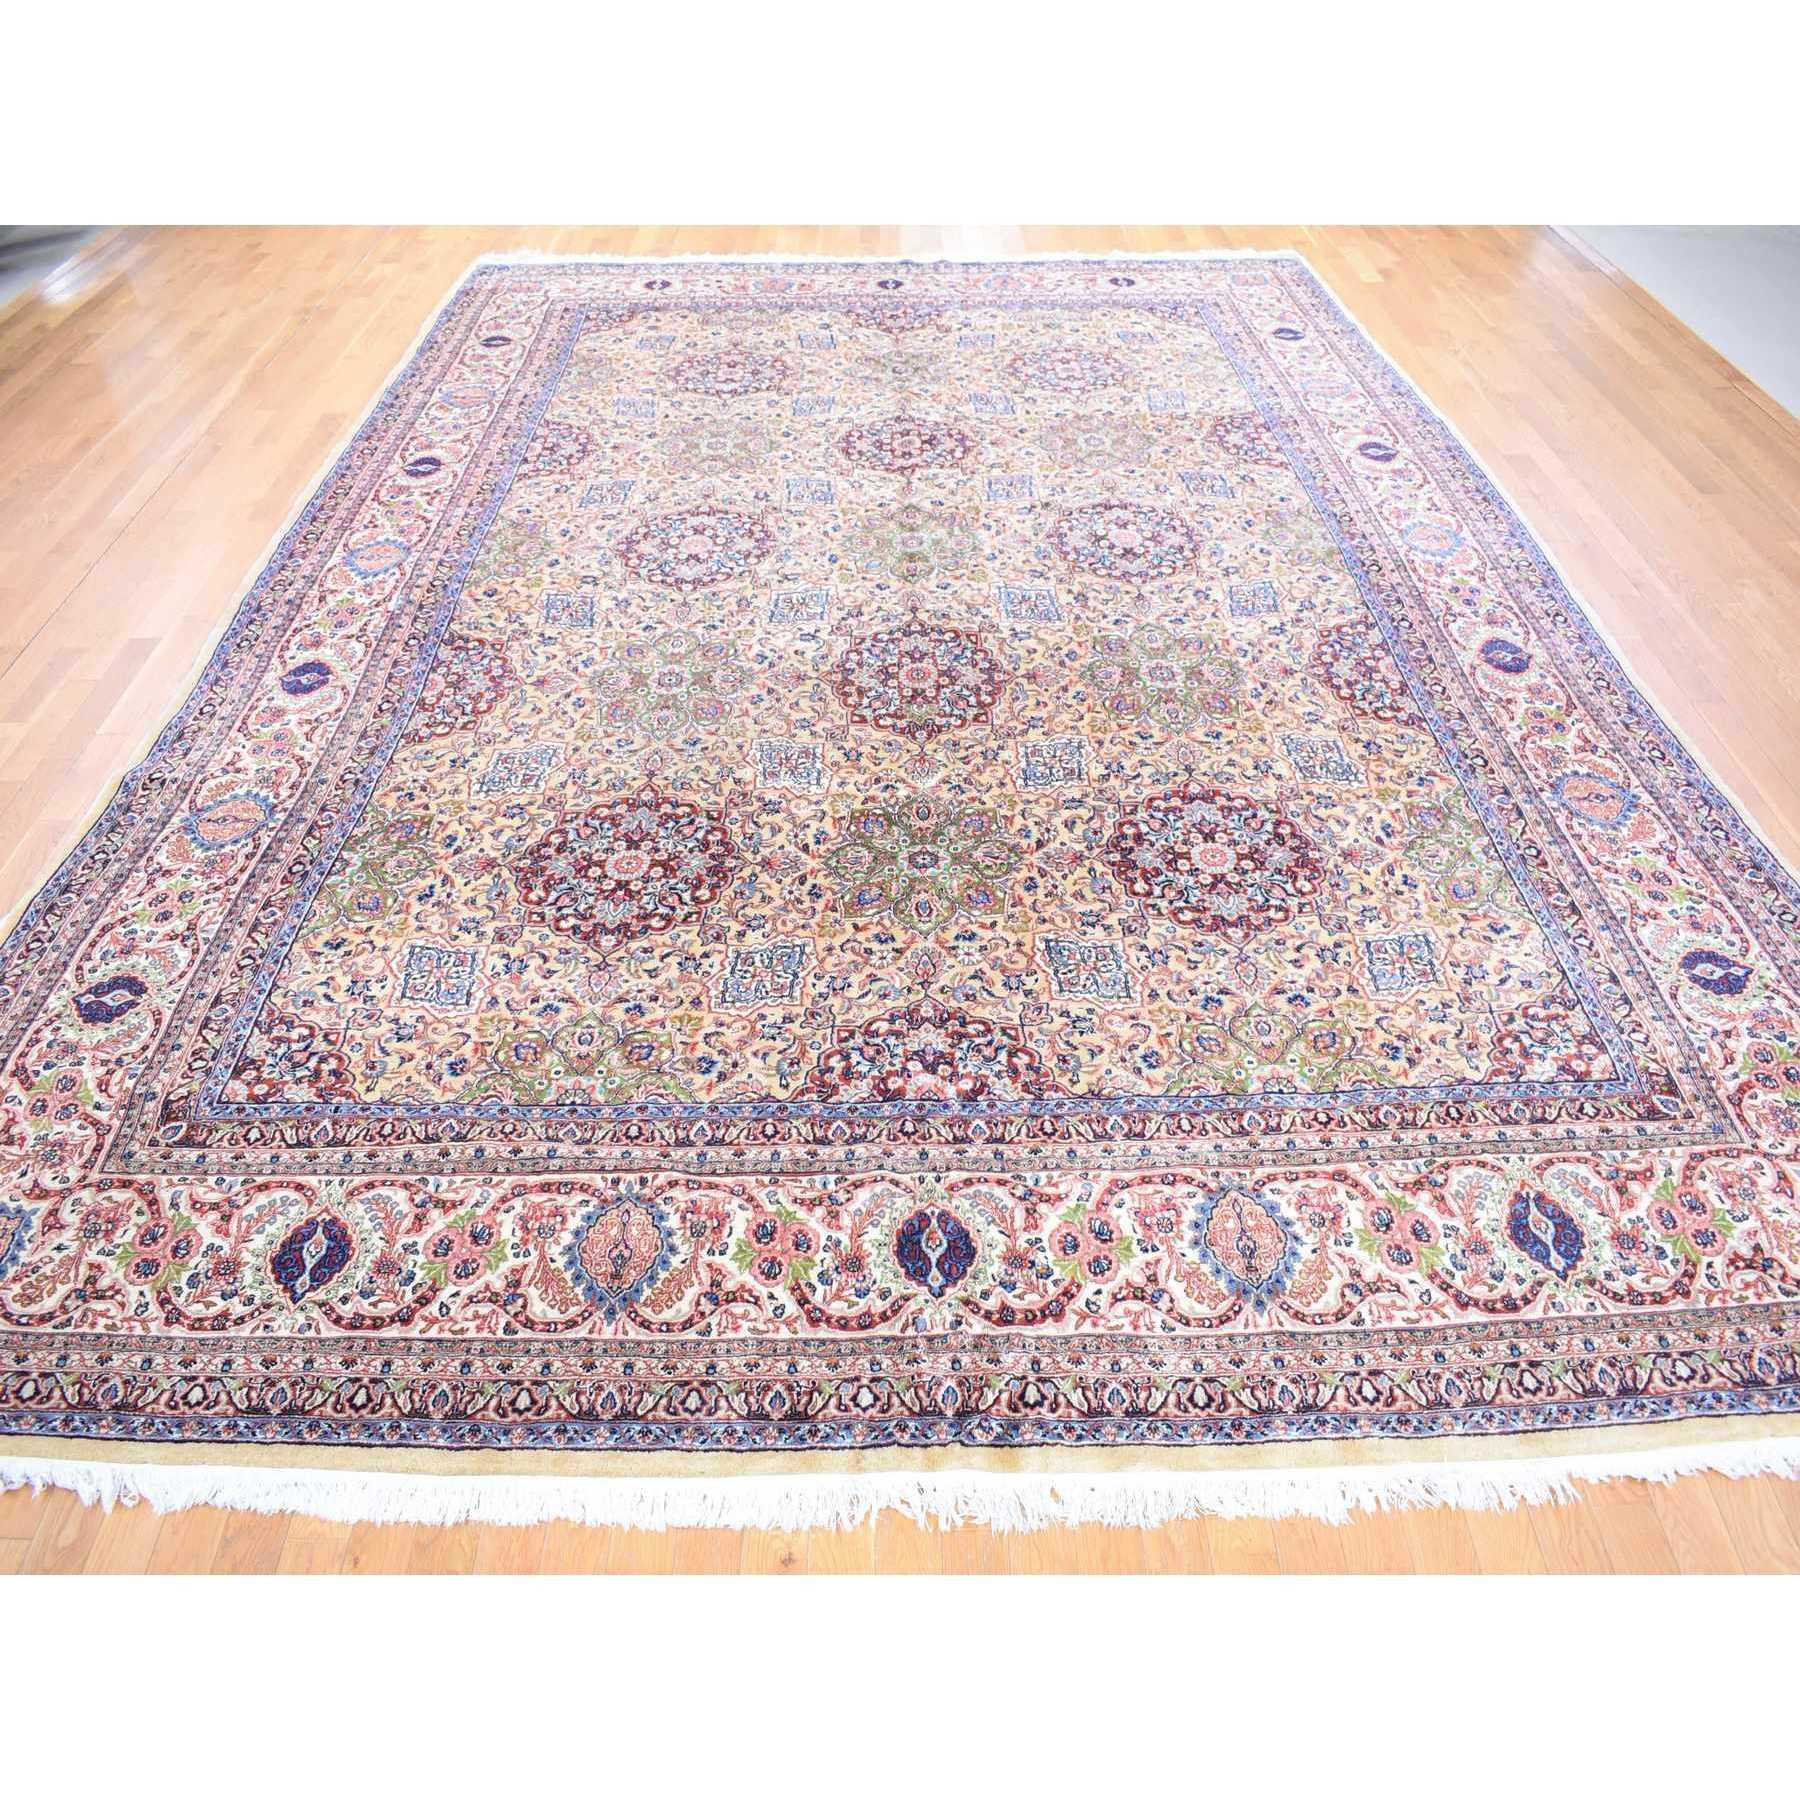 This fabulous Hand-Knotted carpet has been created and designed for extra strength and durability. This rug has been handcrafted for weeks in the traditional method that is used to make
Exact rug size in feet and inches : 11'5